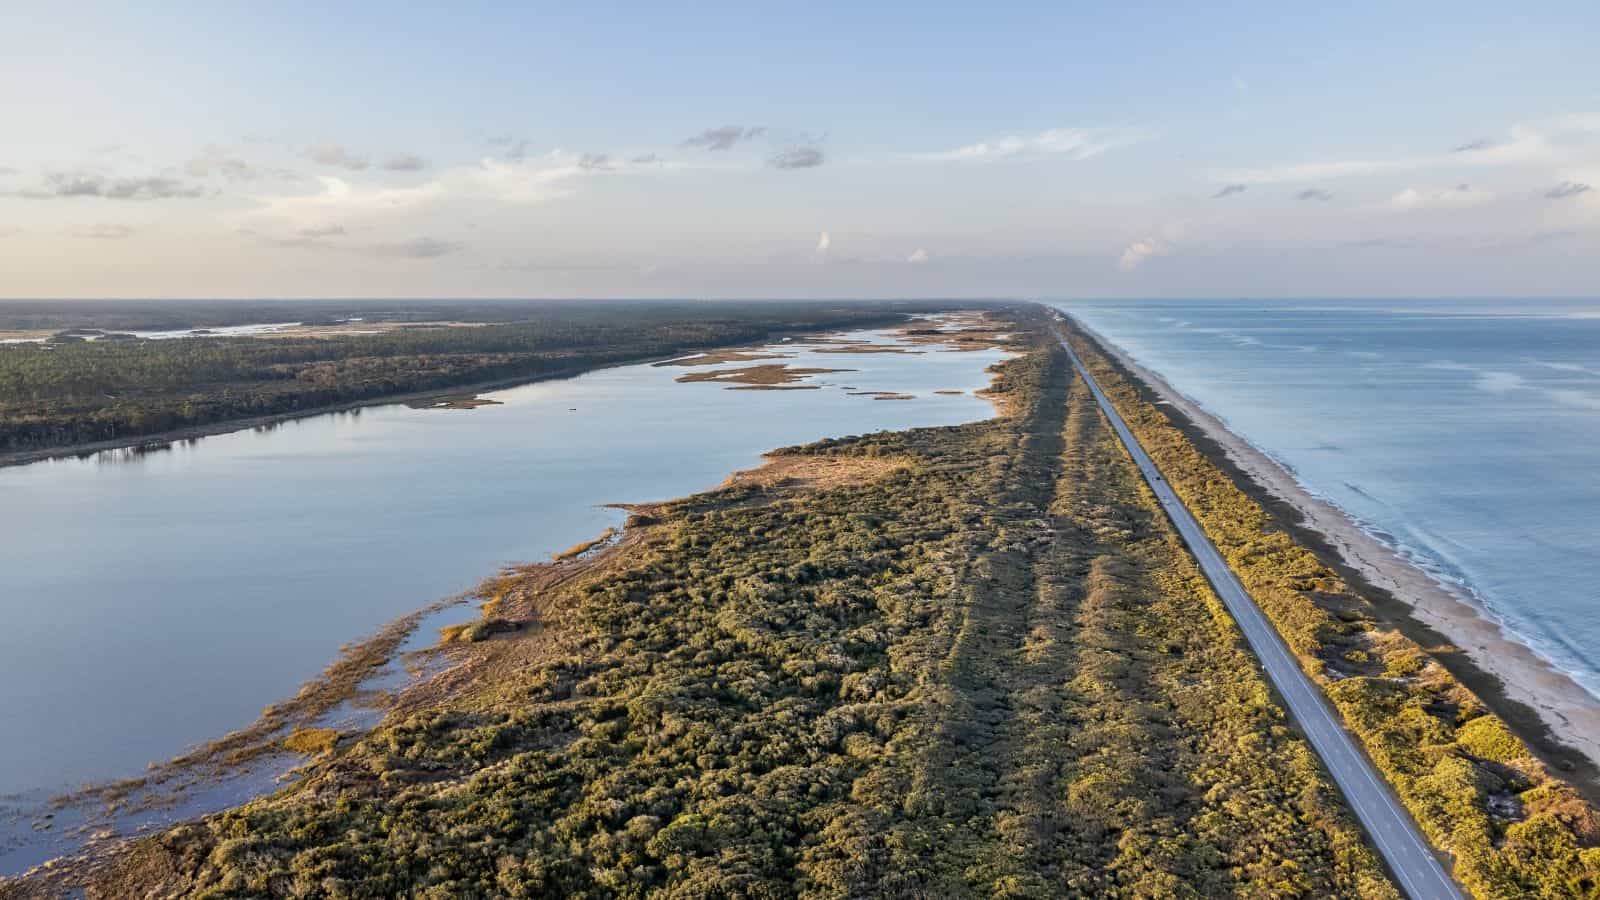 <p>Drive along Florida’s stunning coastline on the A1A, passing through laidback <a href="https://whatthefab.com/florida-cities.html" rel="follow">beach towns</a>, pristine waters, and breathtaking ocean views.</p><p>This 328-mile route stretches along Florida’s Atlantic coastline, offering opportunities for swimming, snorkeling, and enjoying the Sunshine State’s famous beaches.</p><p>Discover historic landmarks like the St. Augustine Lighthouse, explore top towns like Daytona Beach and Palm Beach, and get outside with activities such as kayaking, paddleboarding, and fishing. While driving, ensure you make time to visit the Kennedy Space Center, the Jupiter Inlet Lighthouse, and the Sebastian Inlet State Park.</p>